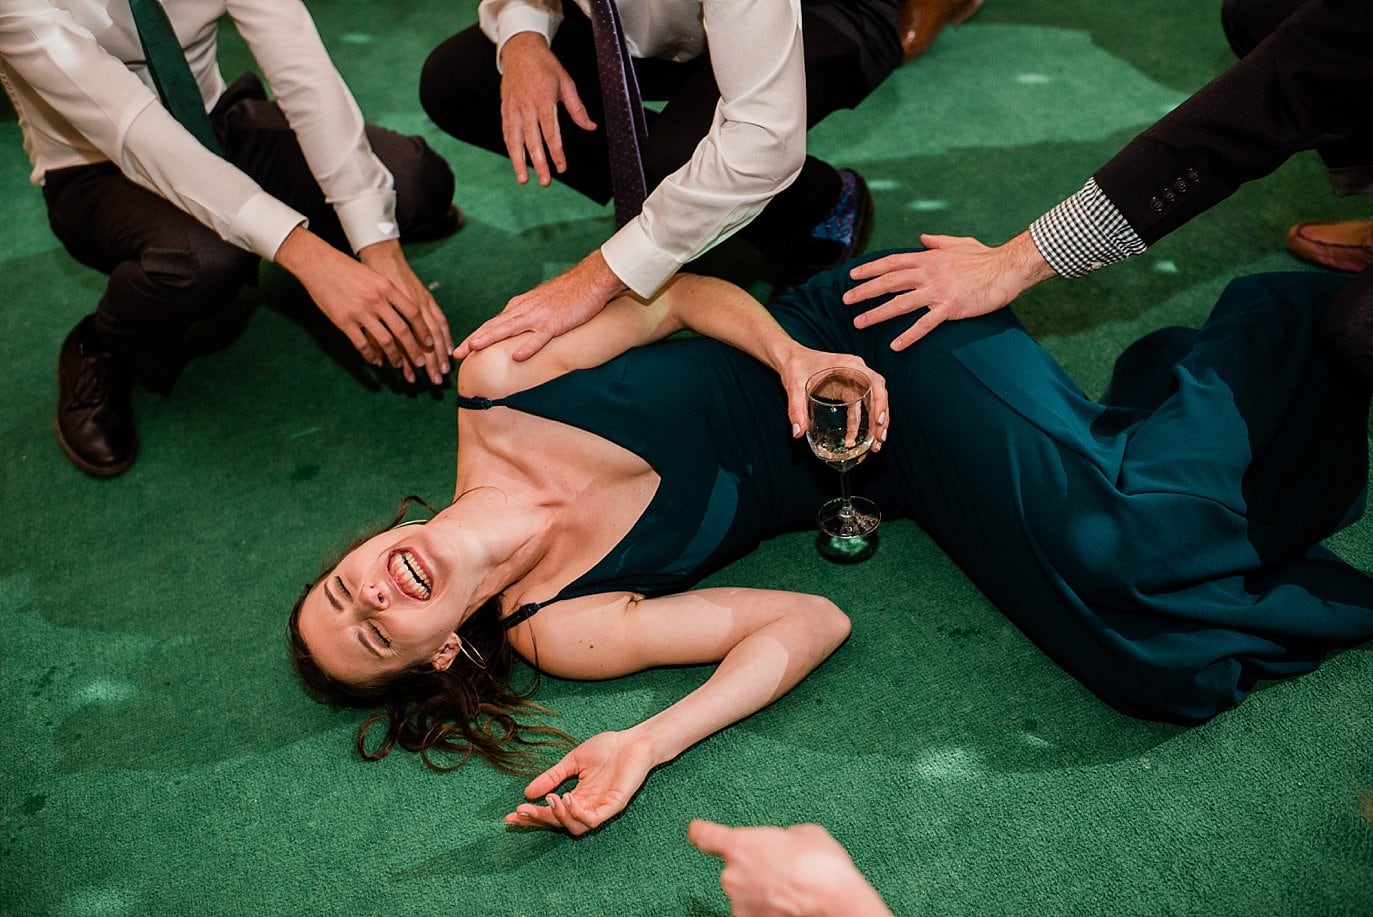 bridesmaid on floor during reception dancing at B Lazy 2 Ranch by Fraser wedding photographer Jennie Crate